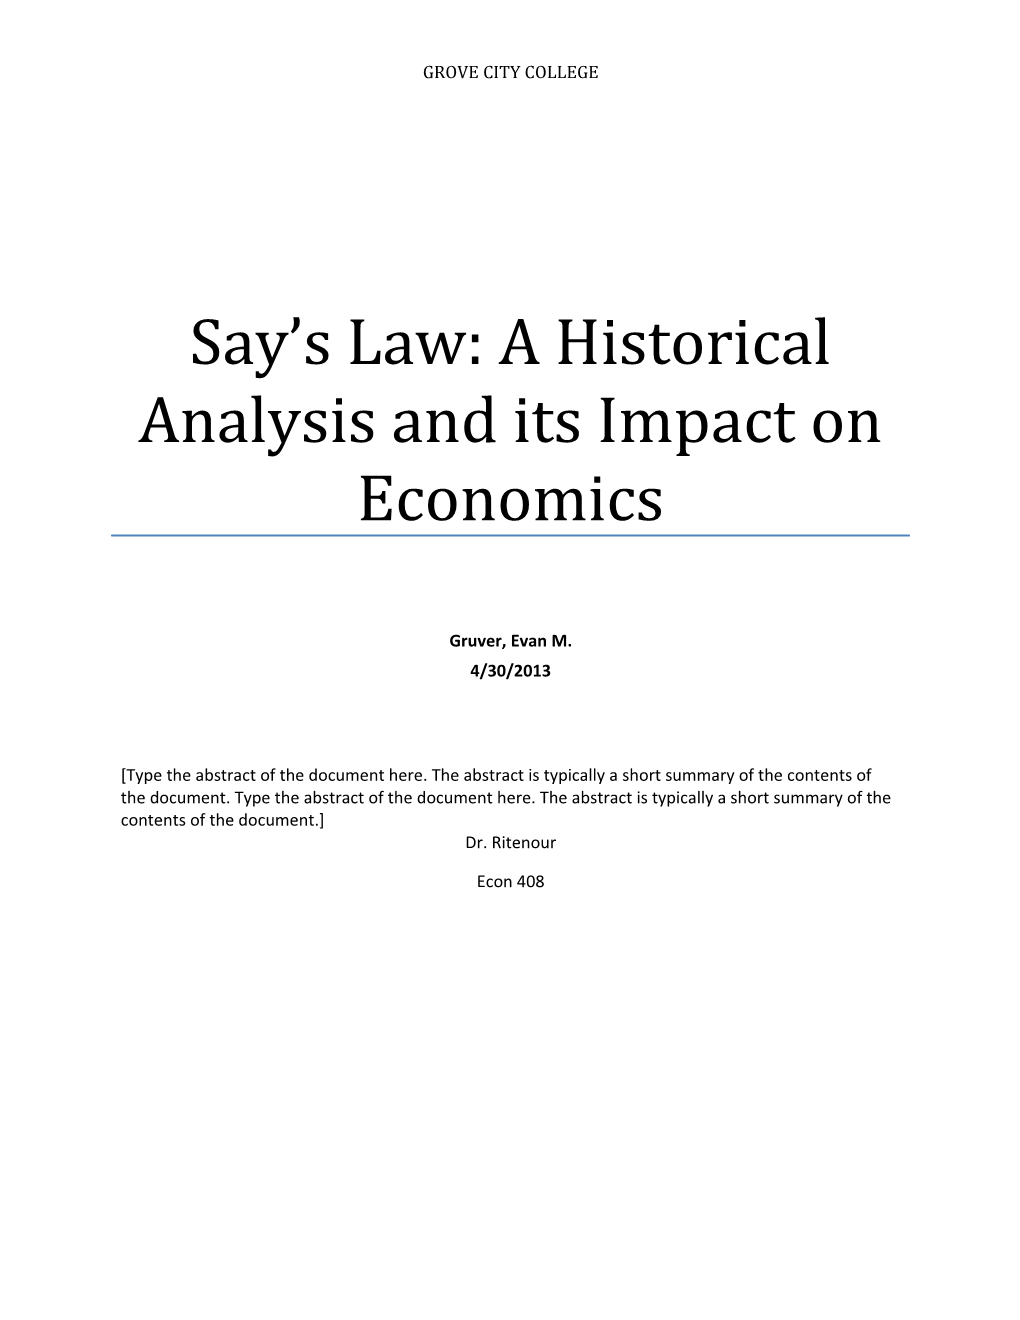 Say S Law: a Historical Analysis and Its Impact on Economics